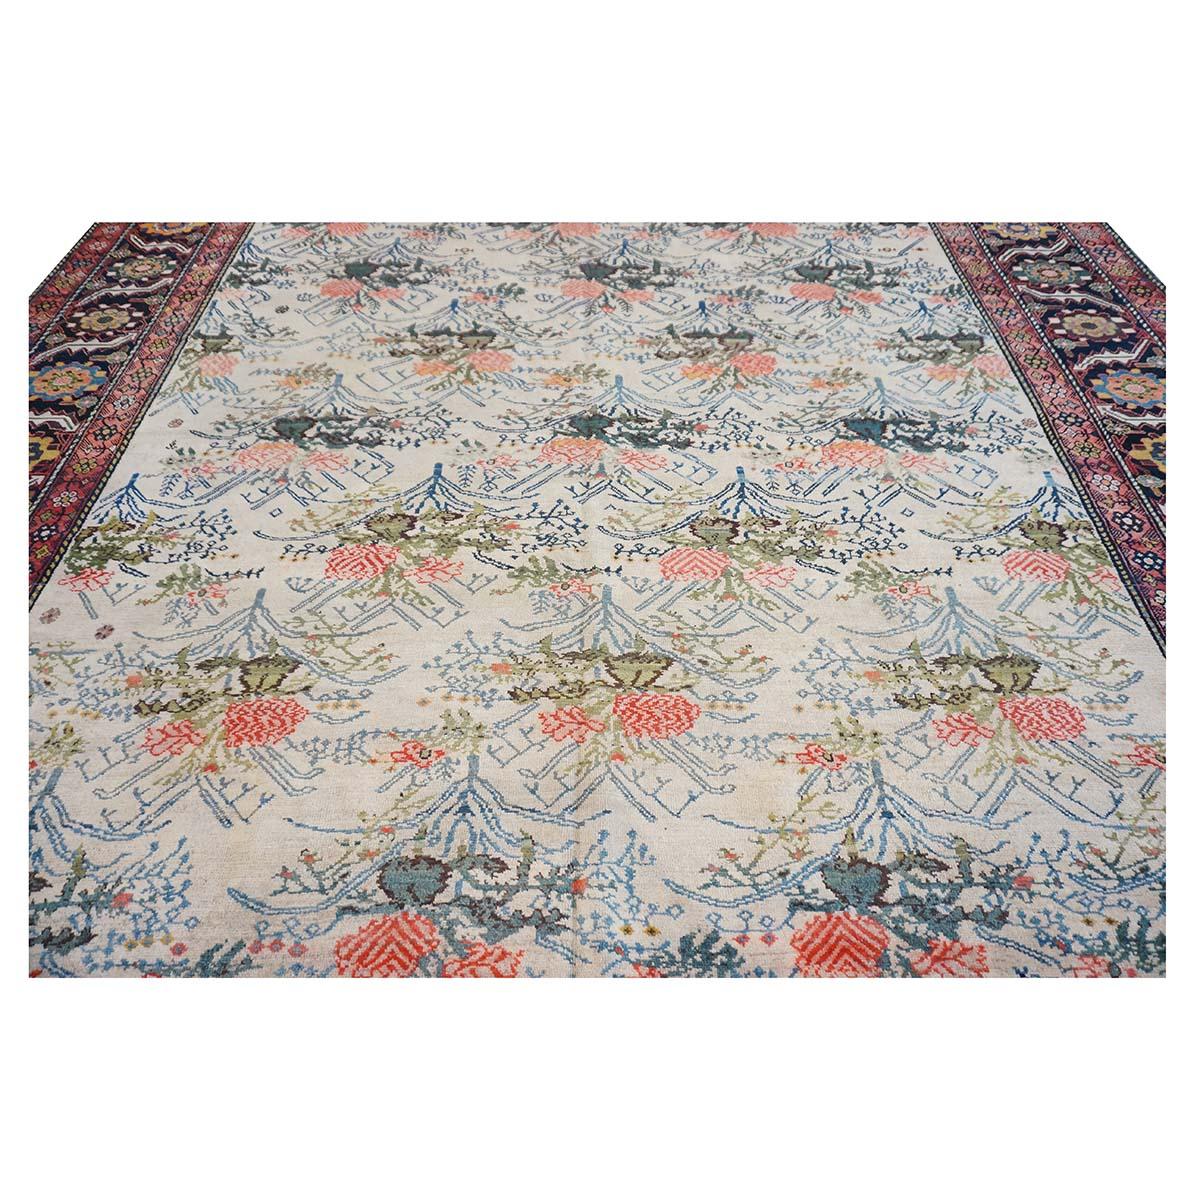 19th Century Large Antique Persian Malayer 11x18 Handwoven Rug For Sale 2